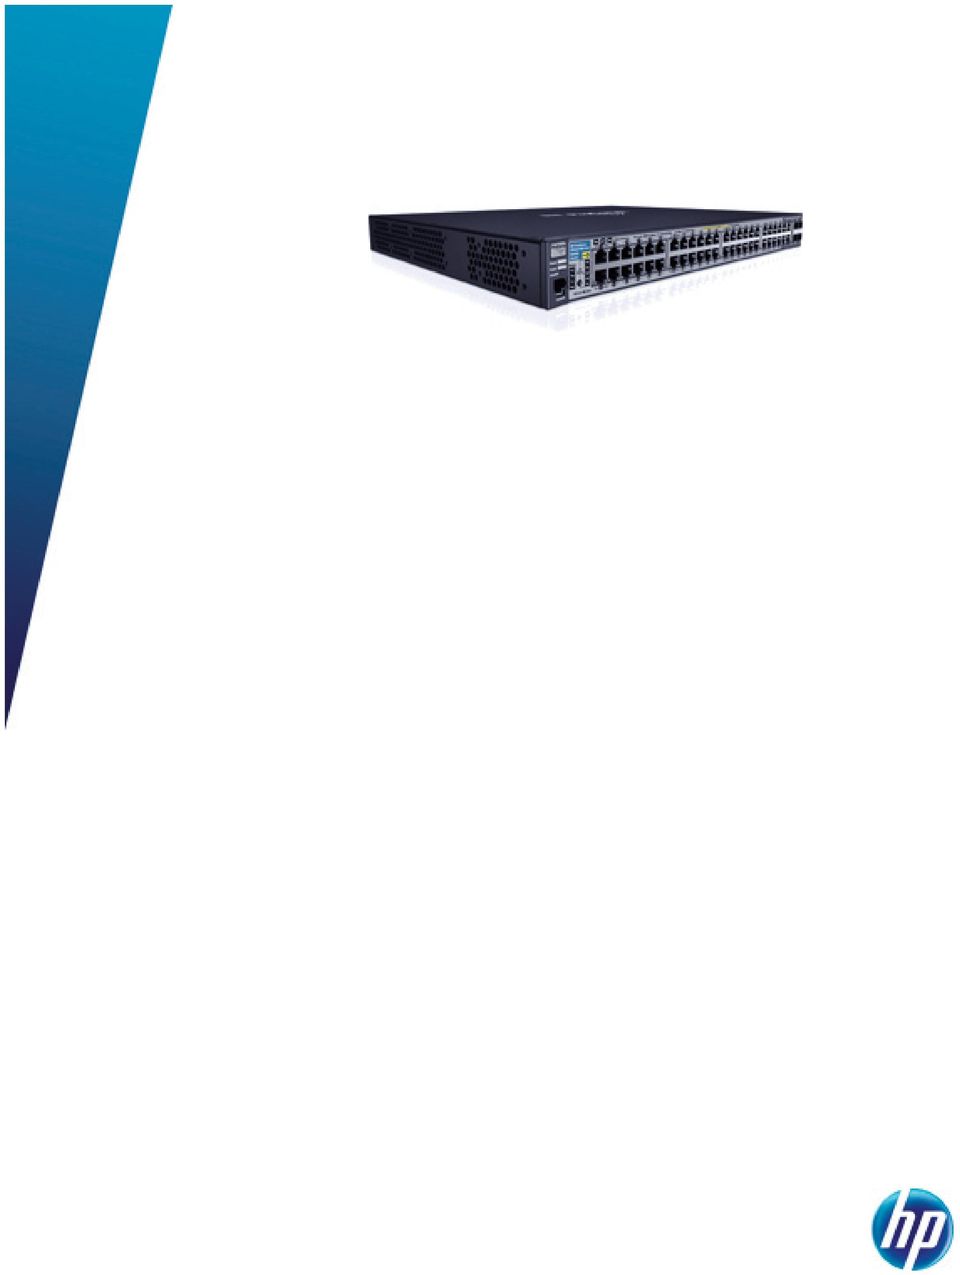 In addition, the 2910 al Switch Series supports up to four optional 10 Gigabit Ethernet (CX4 and/or SFP+) ports, thereby offering the most flexible and easy-to-deploy uplinks in its class.